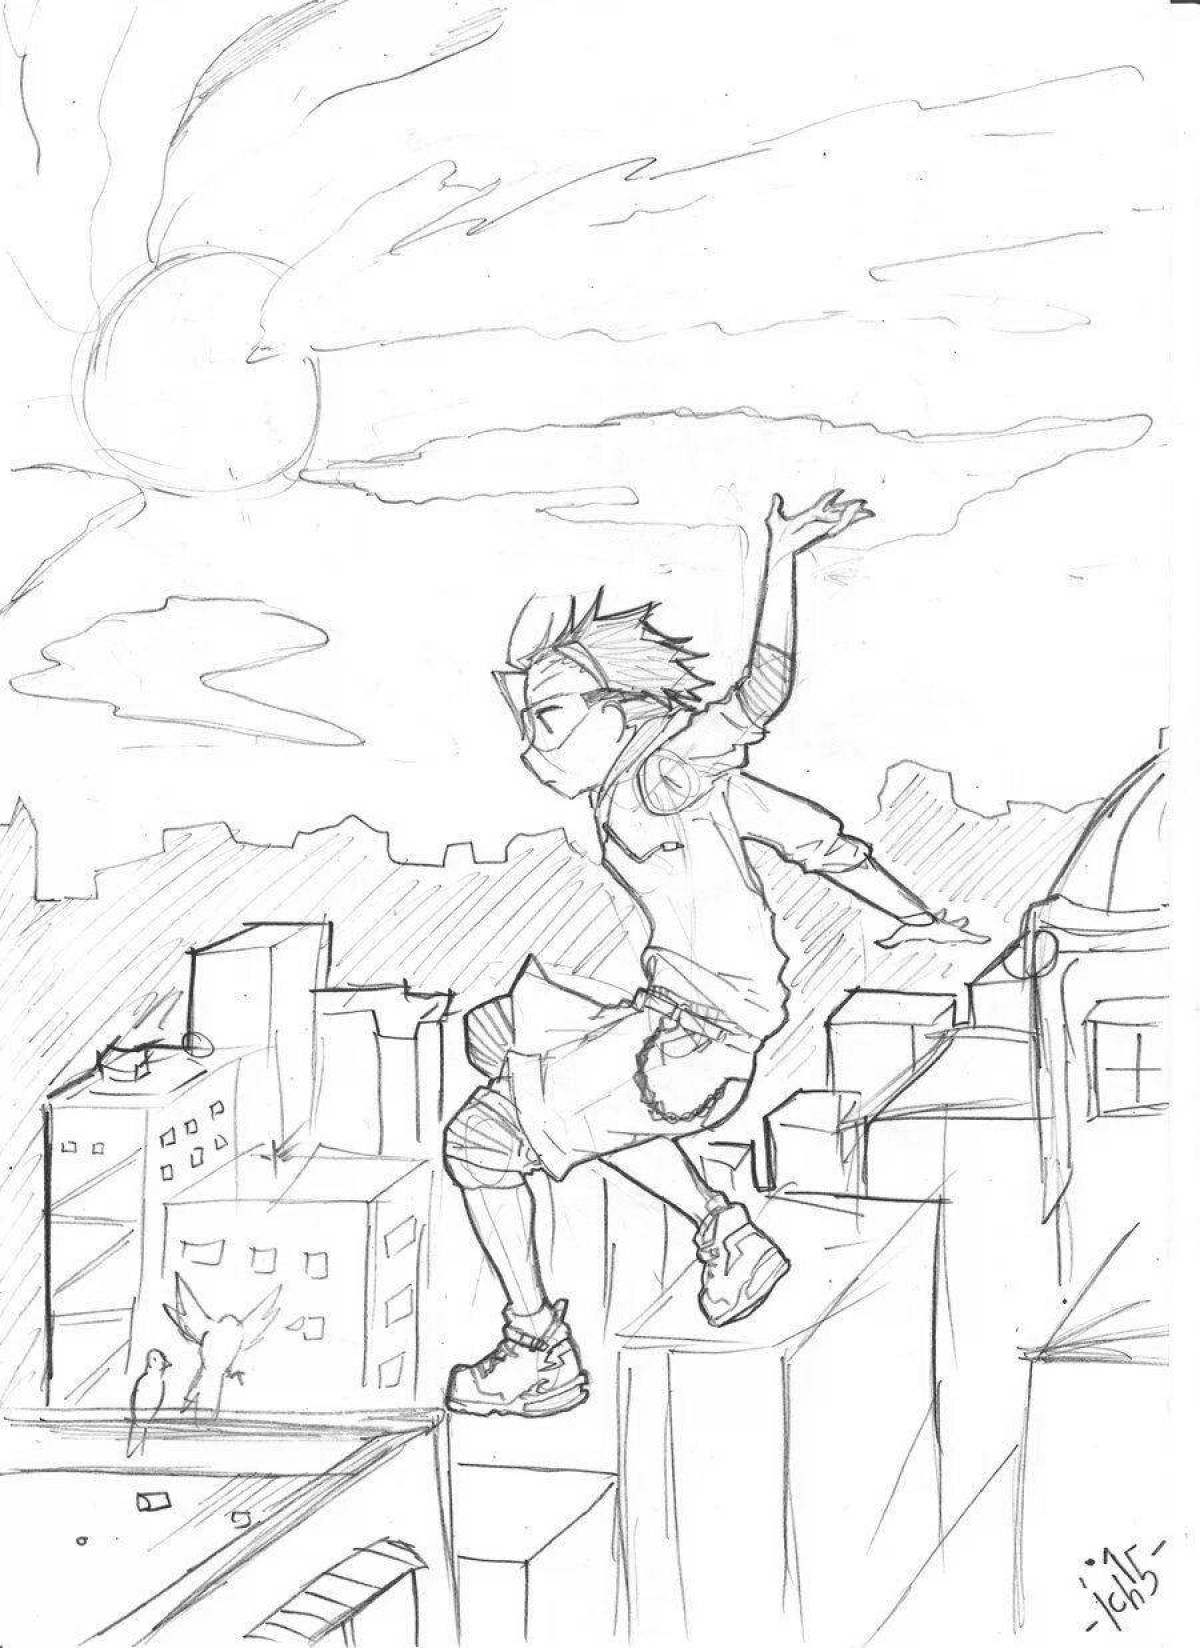 Coloring page energetic parkour